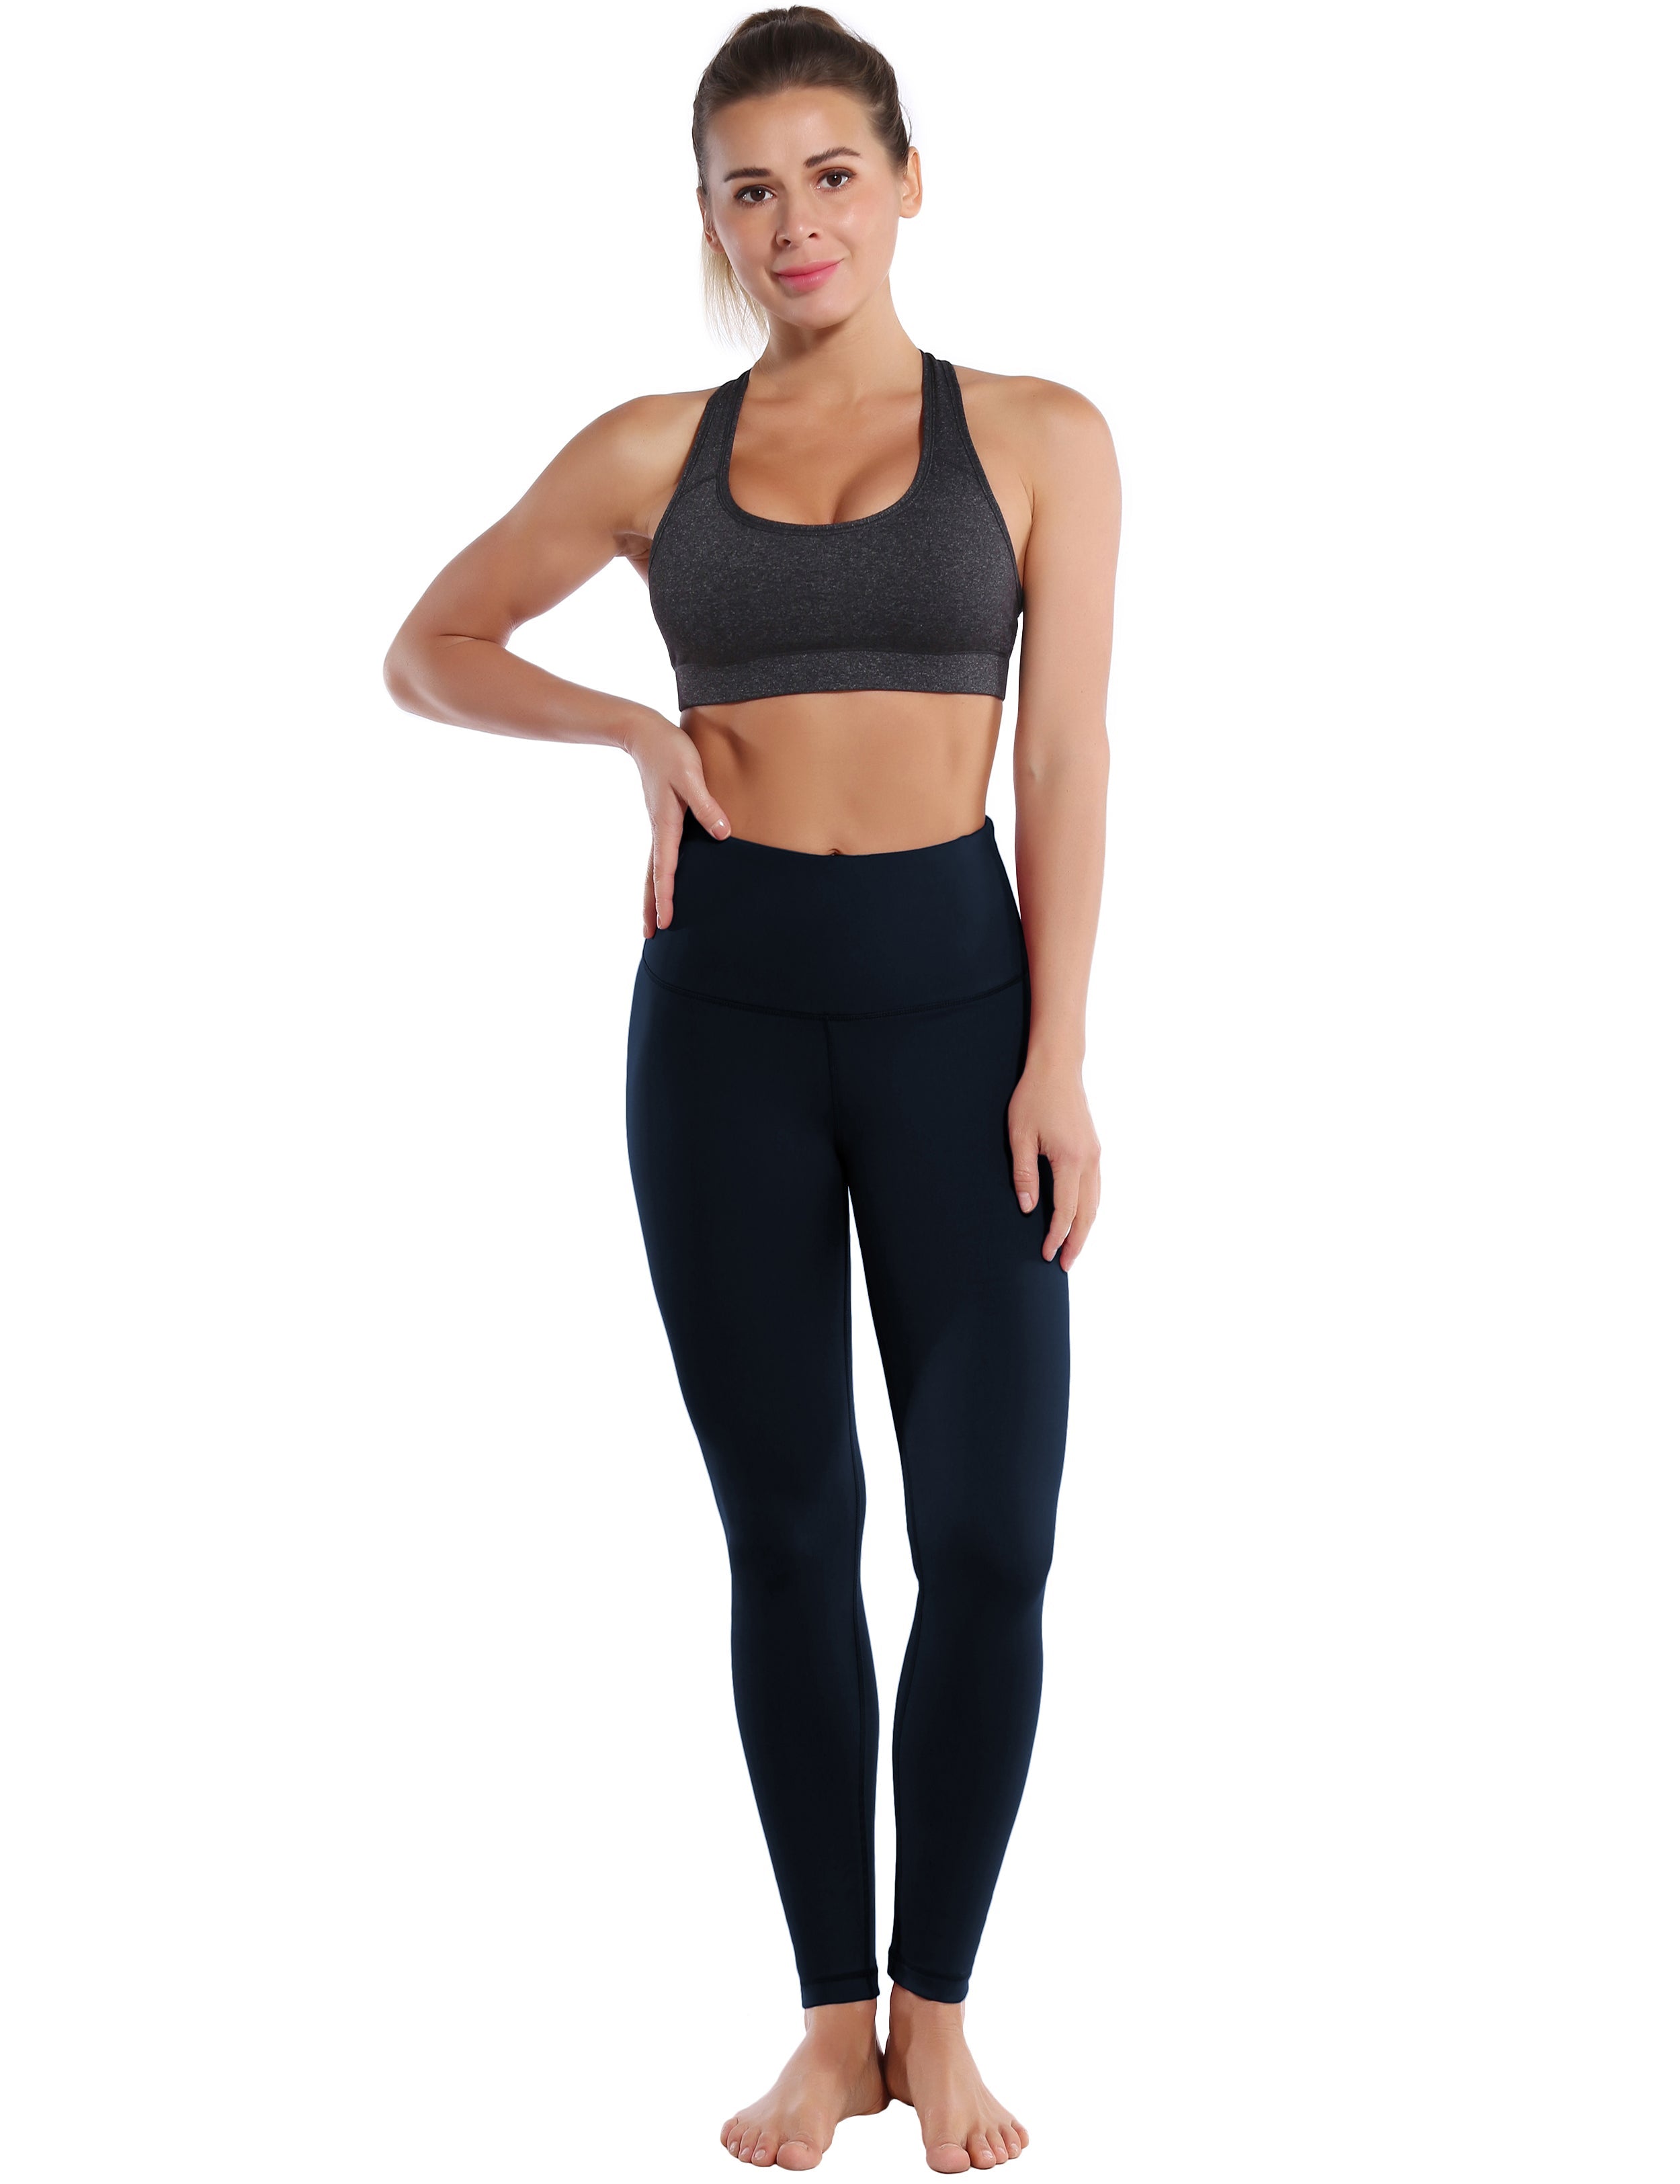 High Waist Biking Pants darknavy 75%Nylon/25%Spandex Fabric doesn't attract lint easily 4-way stretch No see-through Moisture-wicking Tummy control Inner pocket Four lengths